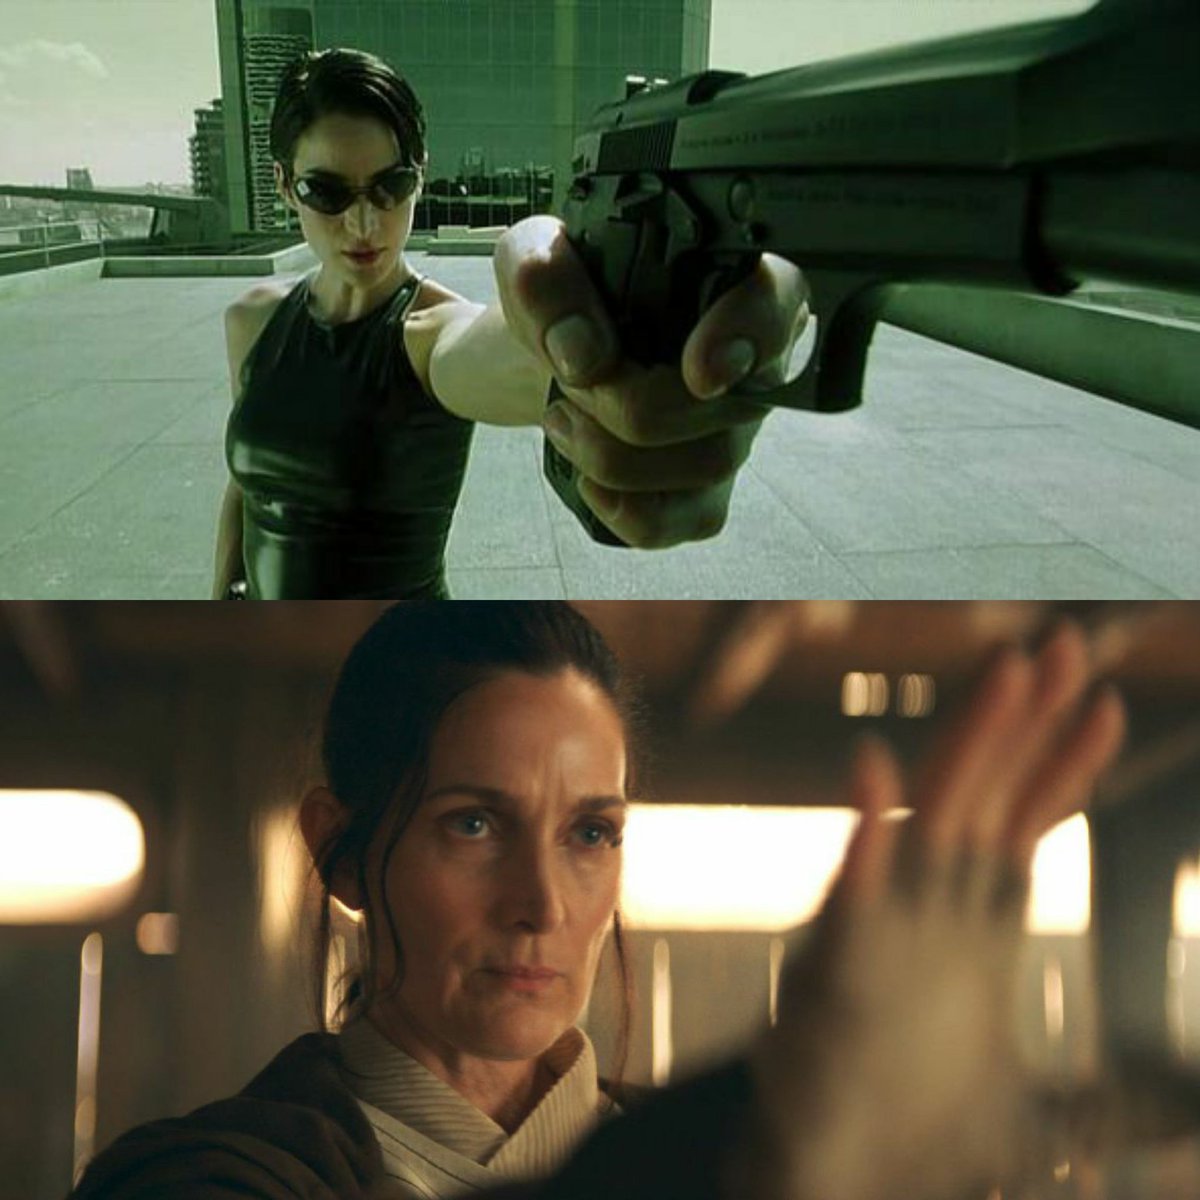 Still surreal we have Trinity in Star Wars 🤯